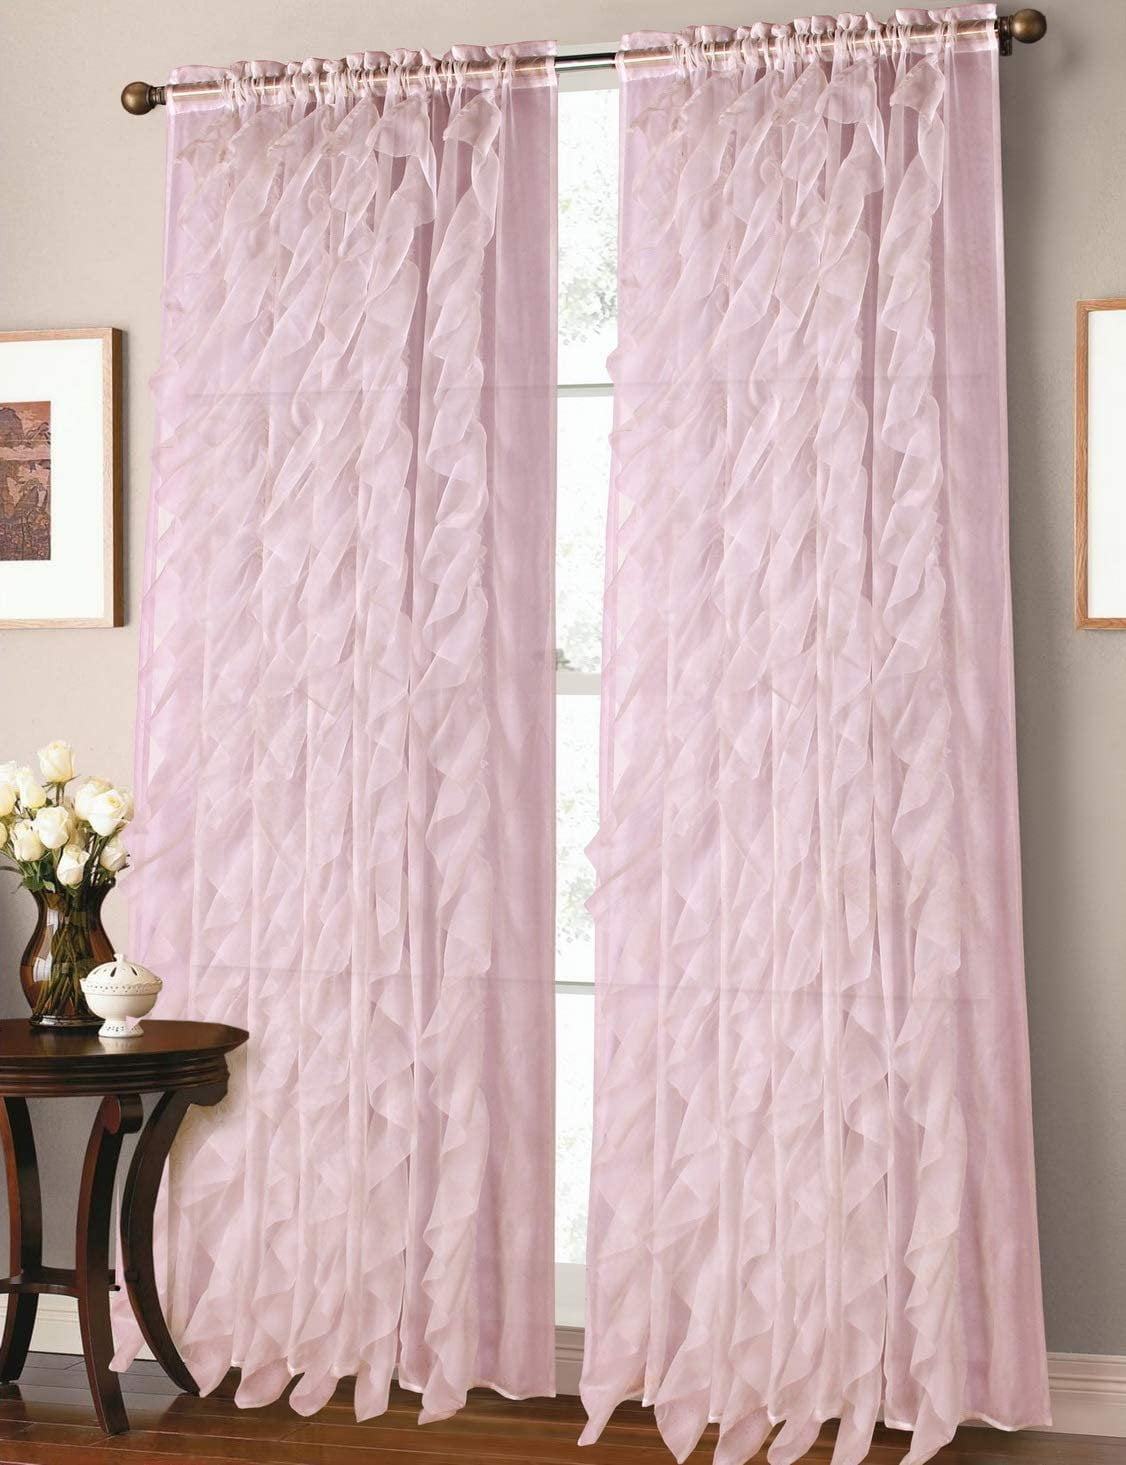 Chic Sheer Voile Vertical Ruffled Tier Window Curtain Panel 108" x 50" 